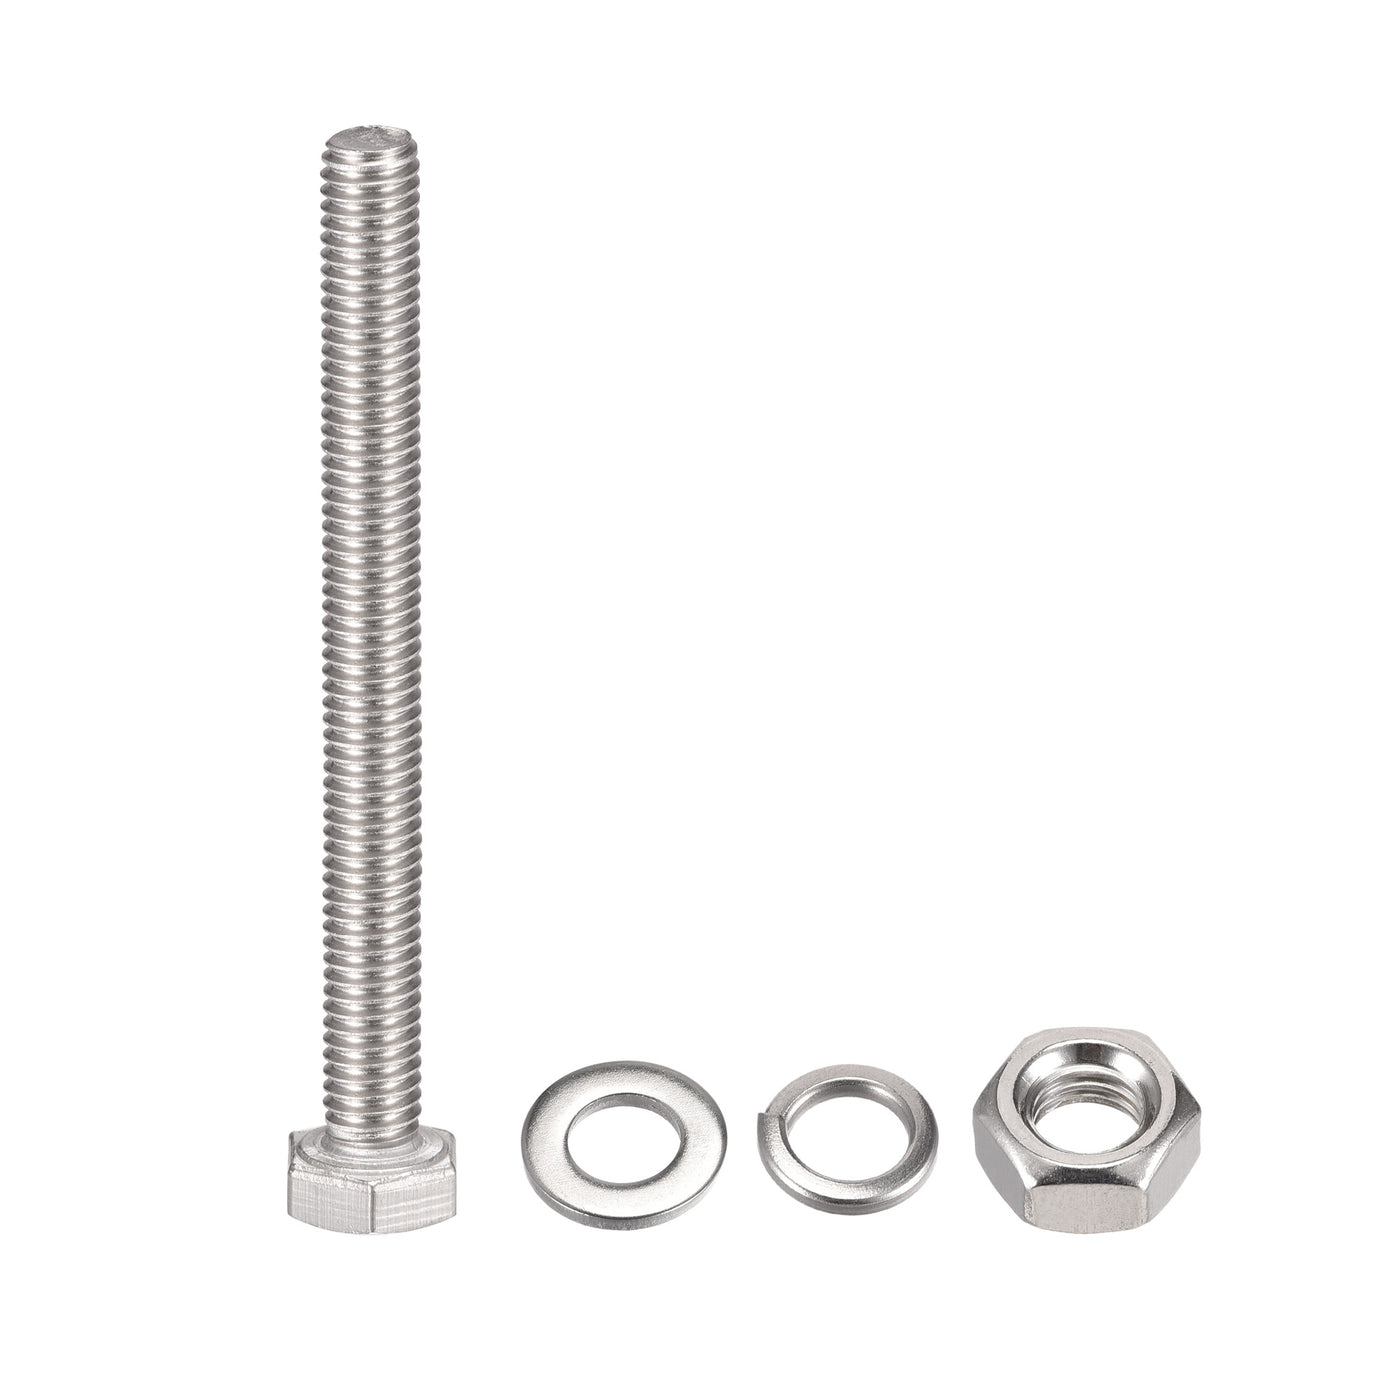 uxcell Uxcell M6 x 70mm Hex Head Screws Bolts, Nuts, Flat & Lock Washers Kits, 304 Stainless Steel Fully Thread Hexagon Bolts 6 Sets